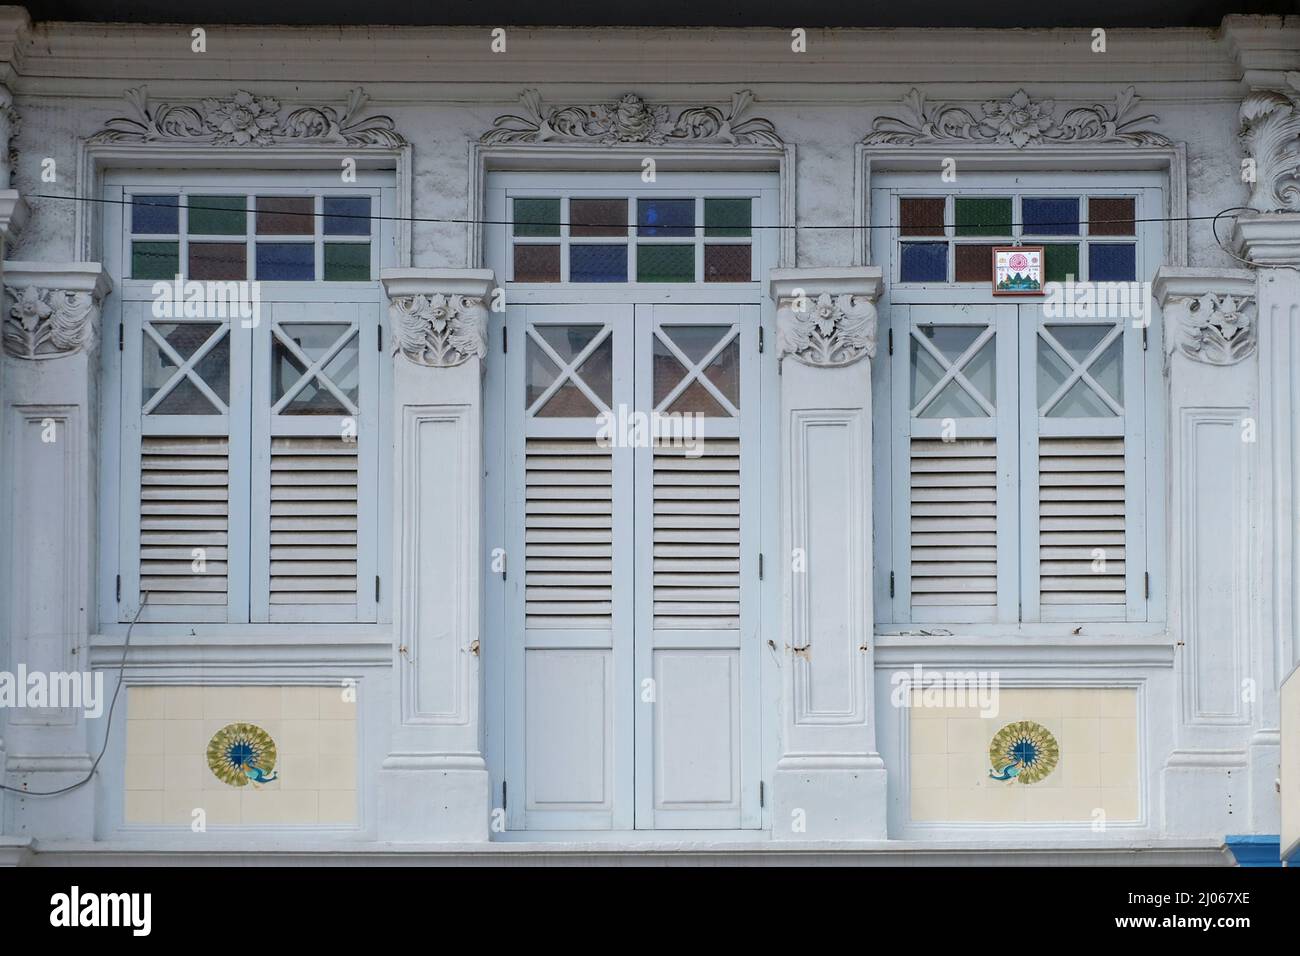 Light blue Straits Chinese Peranakan shophouse with wooden louver shutters, rococo floral designs, peacock mosaic tiles & feng shui mirror with Bagua Stock Photo